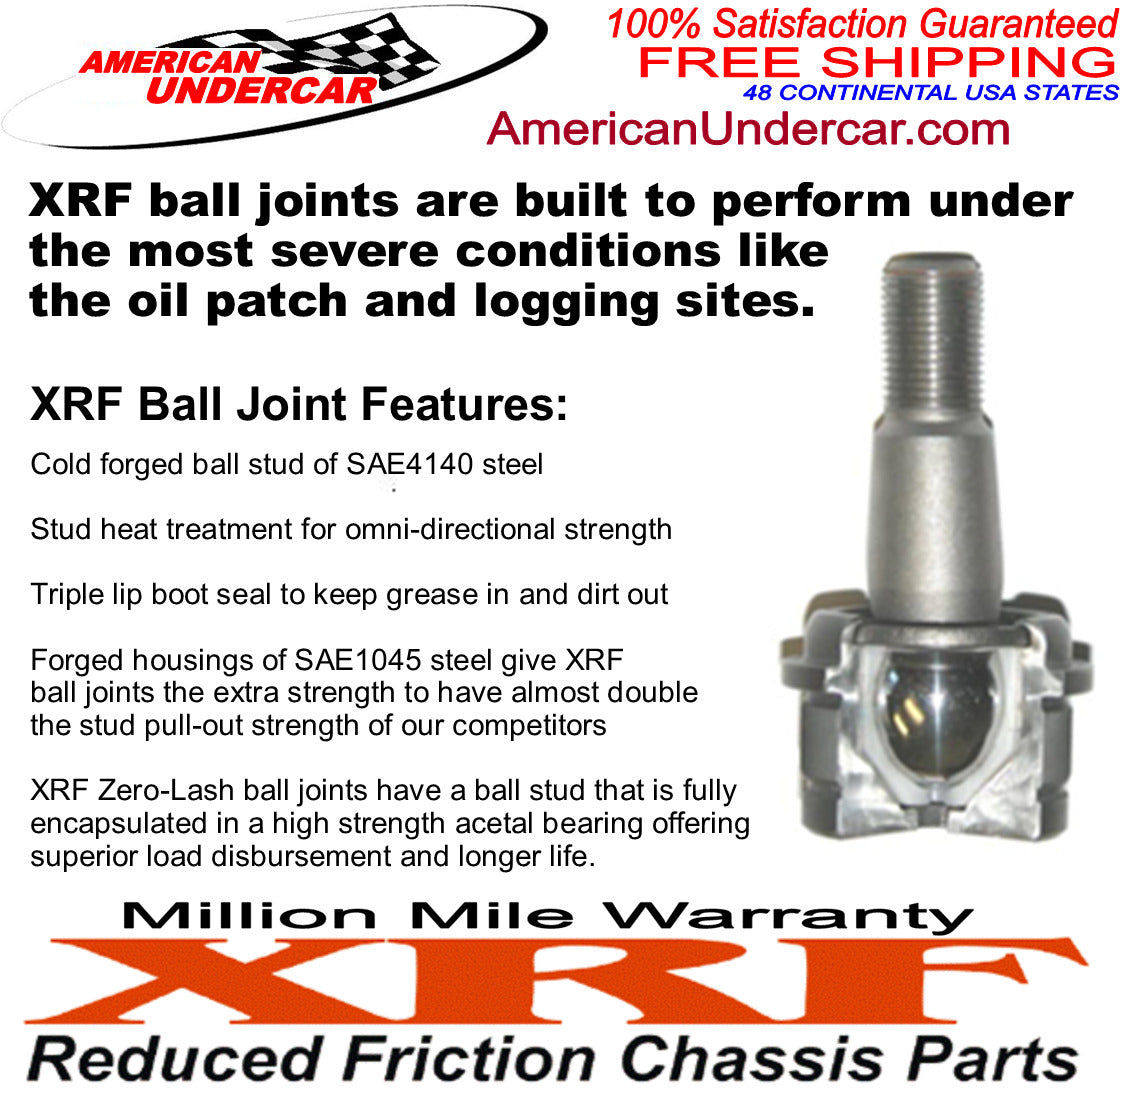 XRF Dodge Ram 3500 Ball Joint Steering and Suspension Kit 2009 - 2012 4x4